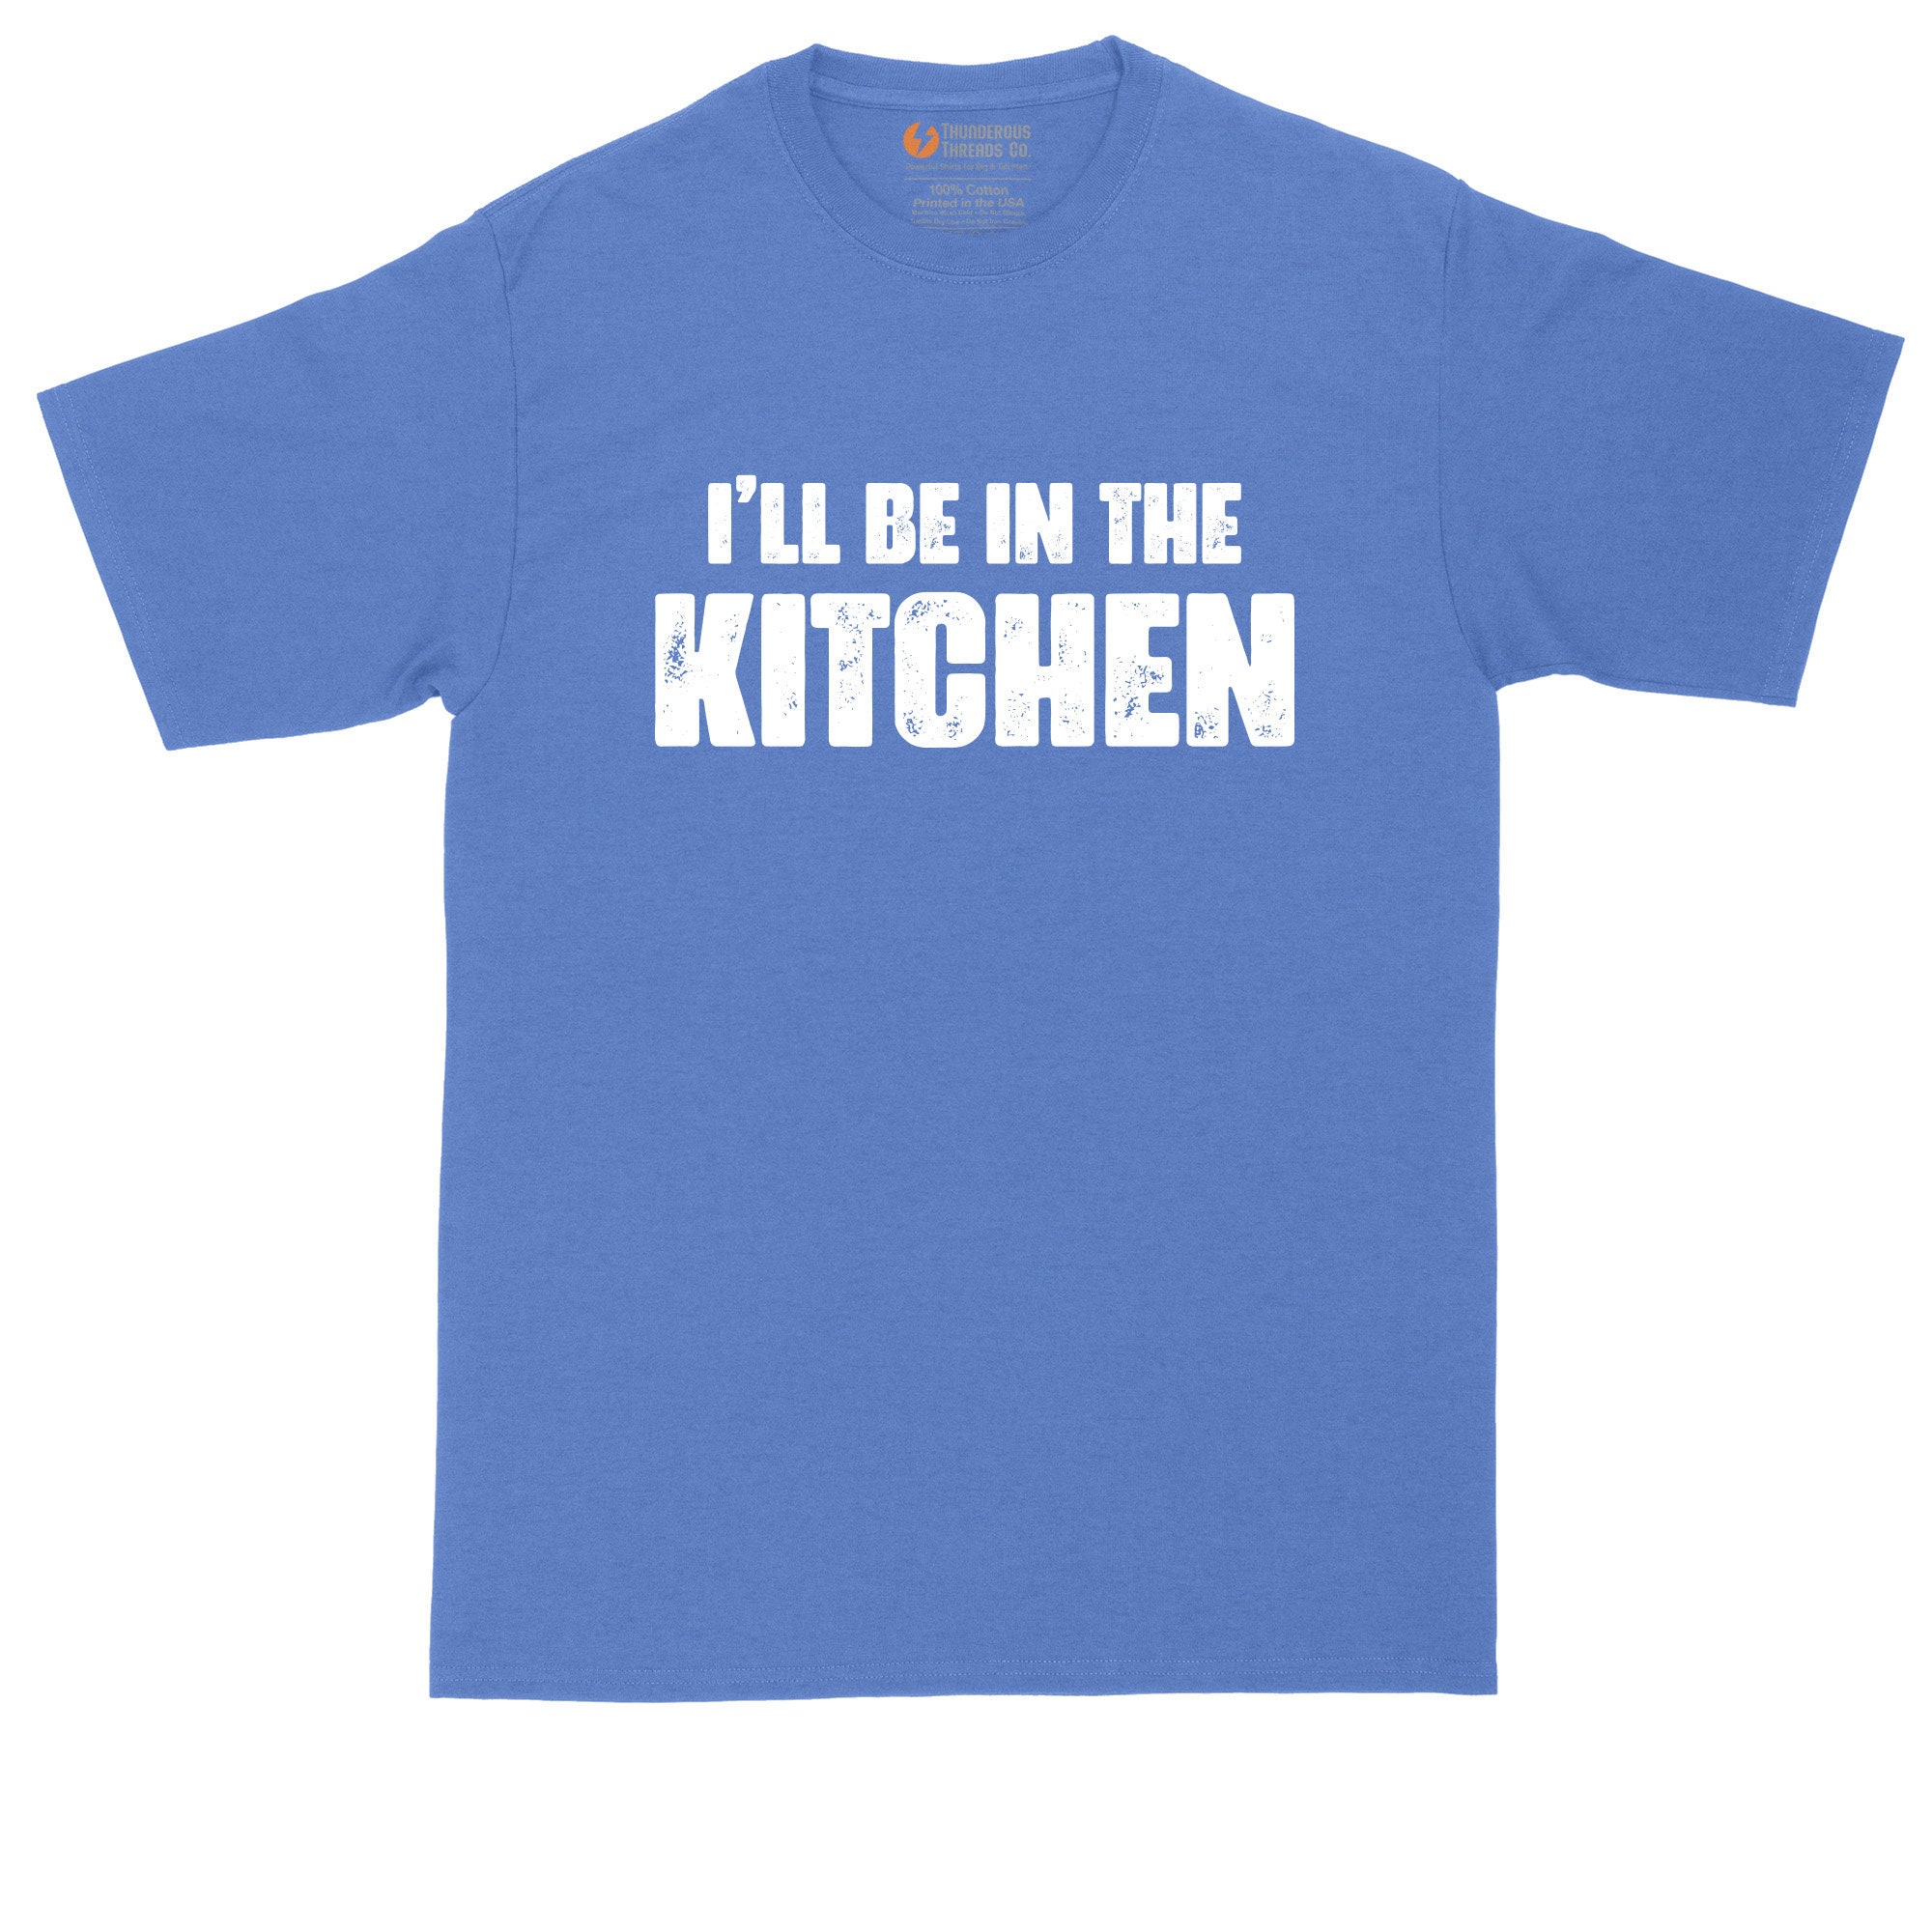 Discover I'll Be in the Kitchen | Funny Shirt | Mens Big & Tall T-Shirt